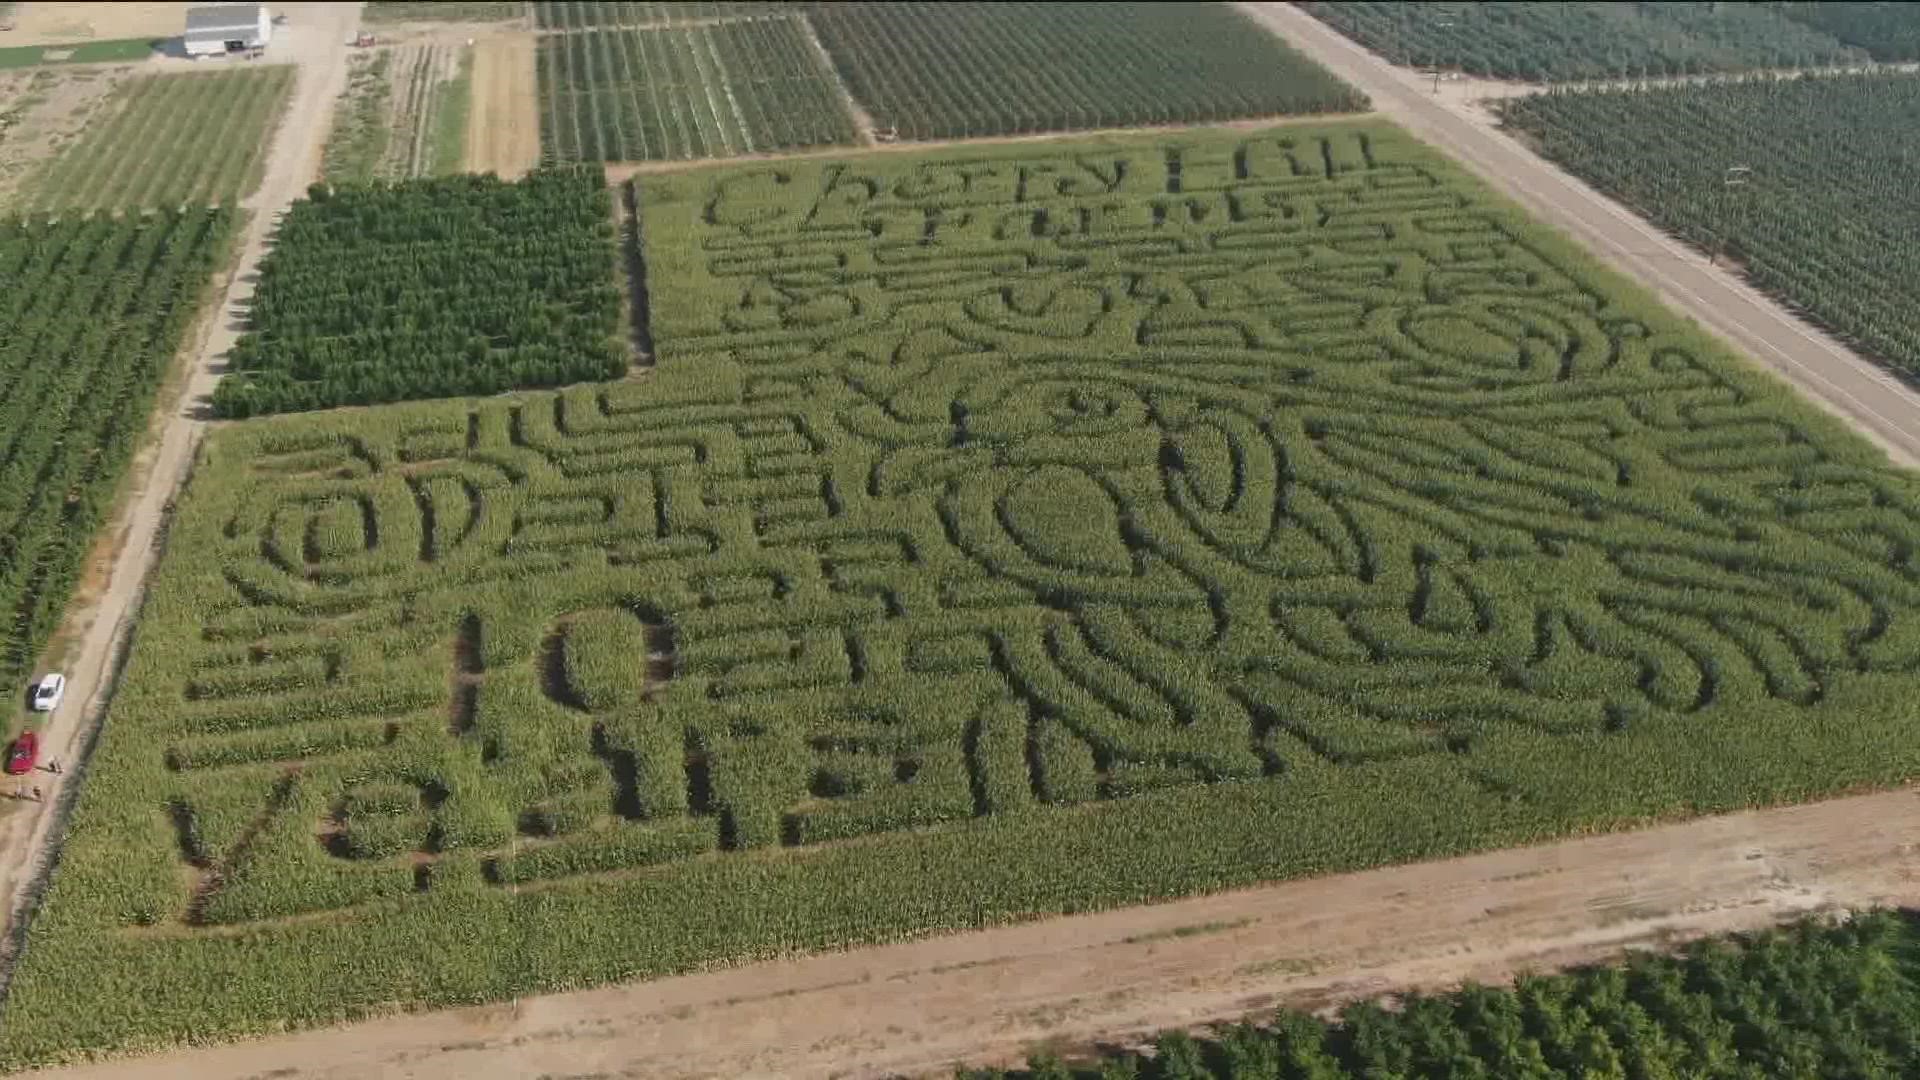 This fall, Cherry Hill Farms in Caldwell will be a destination for something entirely different — a 7-acre corn maze in the middle of the orchards.